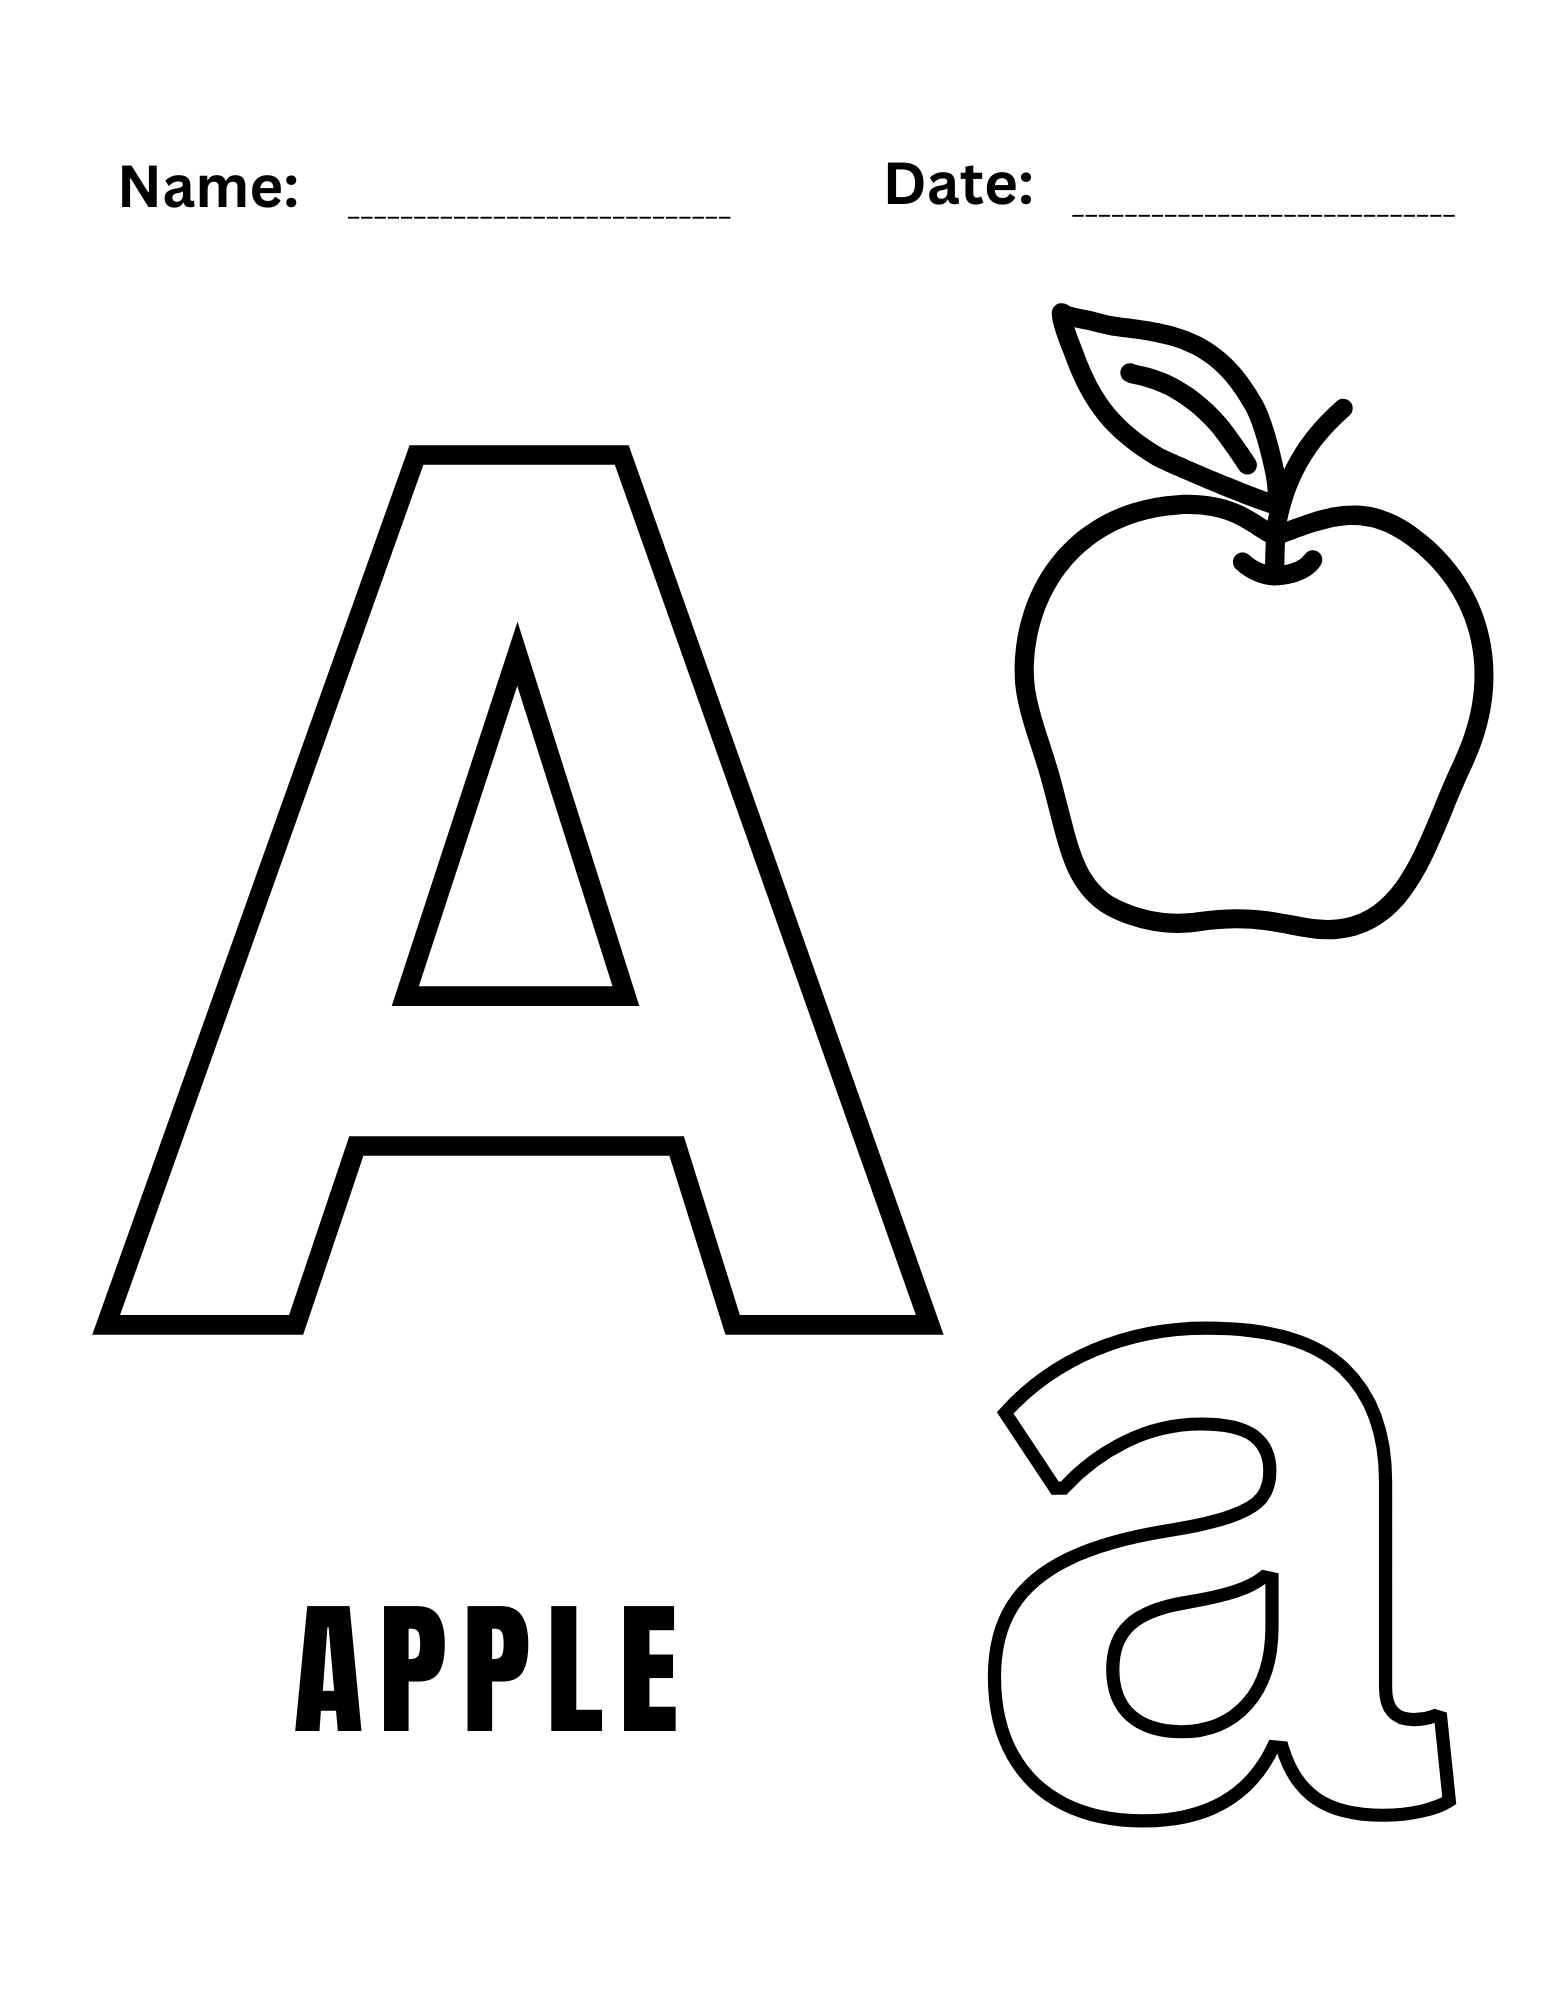 A cute apple surrounded by vibrant colors on an alphabet A coloring pages.